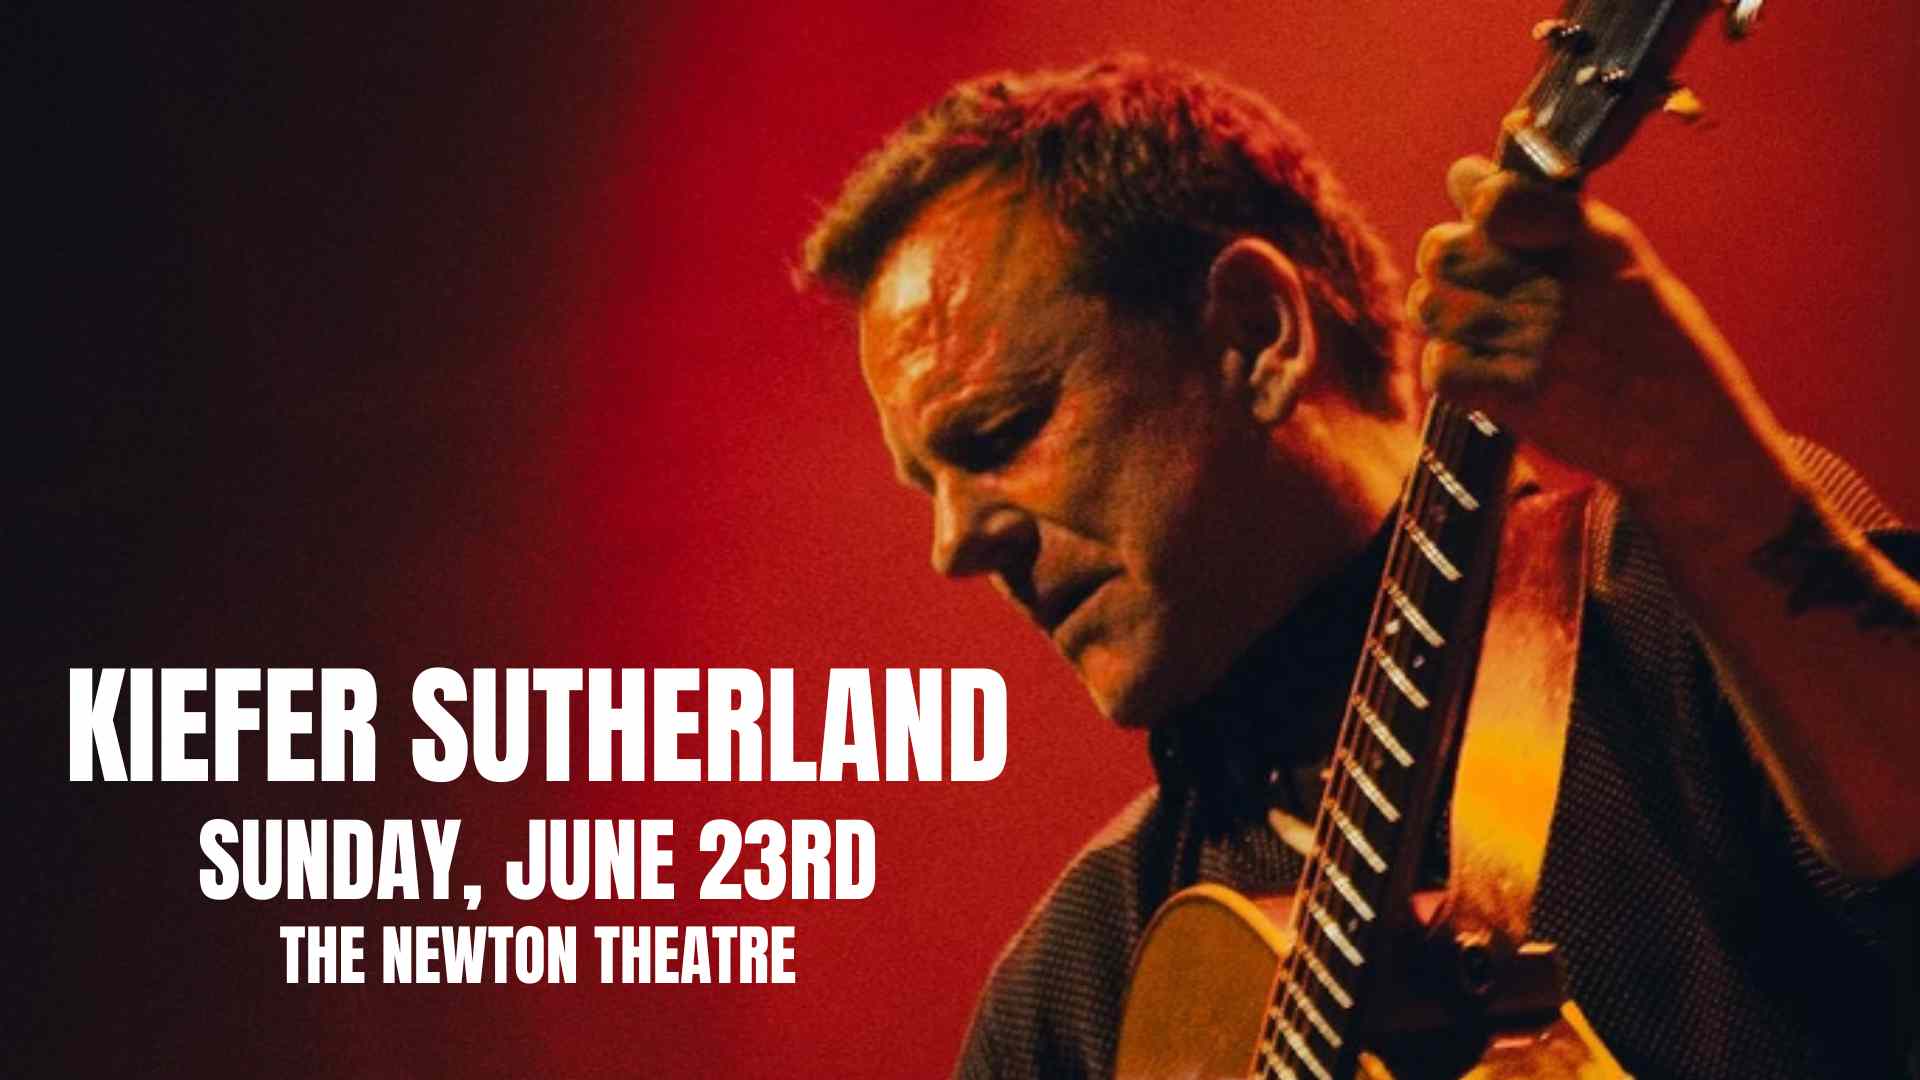 Kiefer Sutherland plays at The Newton Theatre on Sunday, June 23rd.